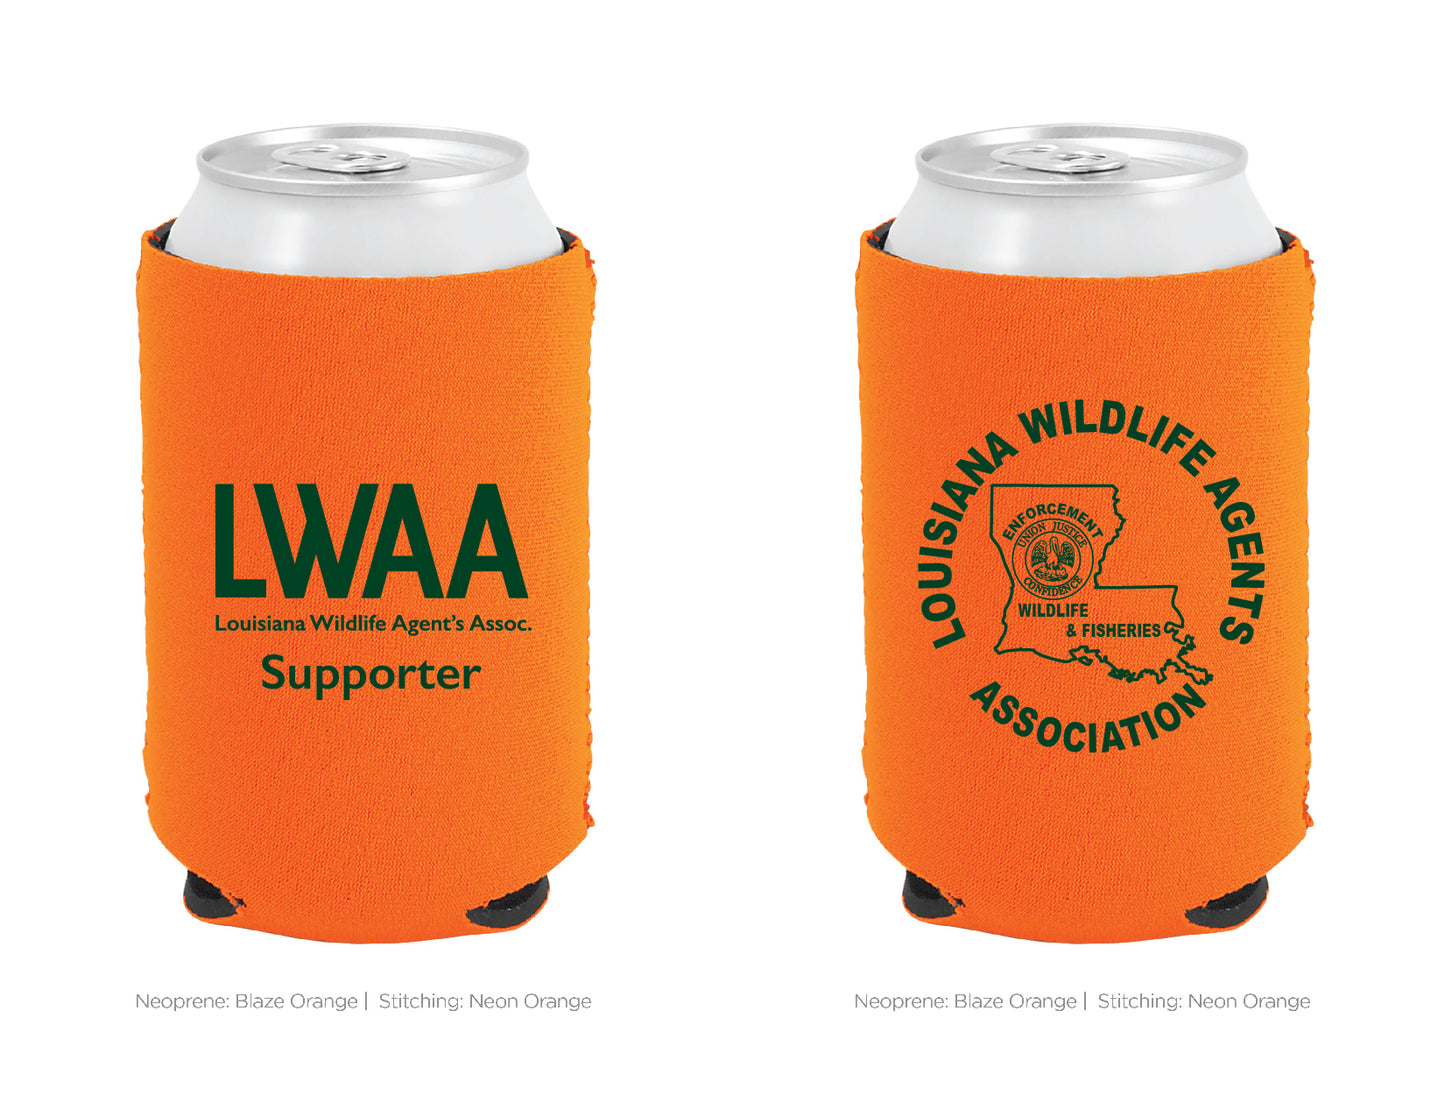 Warning Beer at Work - Koozie - Can Cooler – Southern Drinking Club